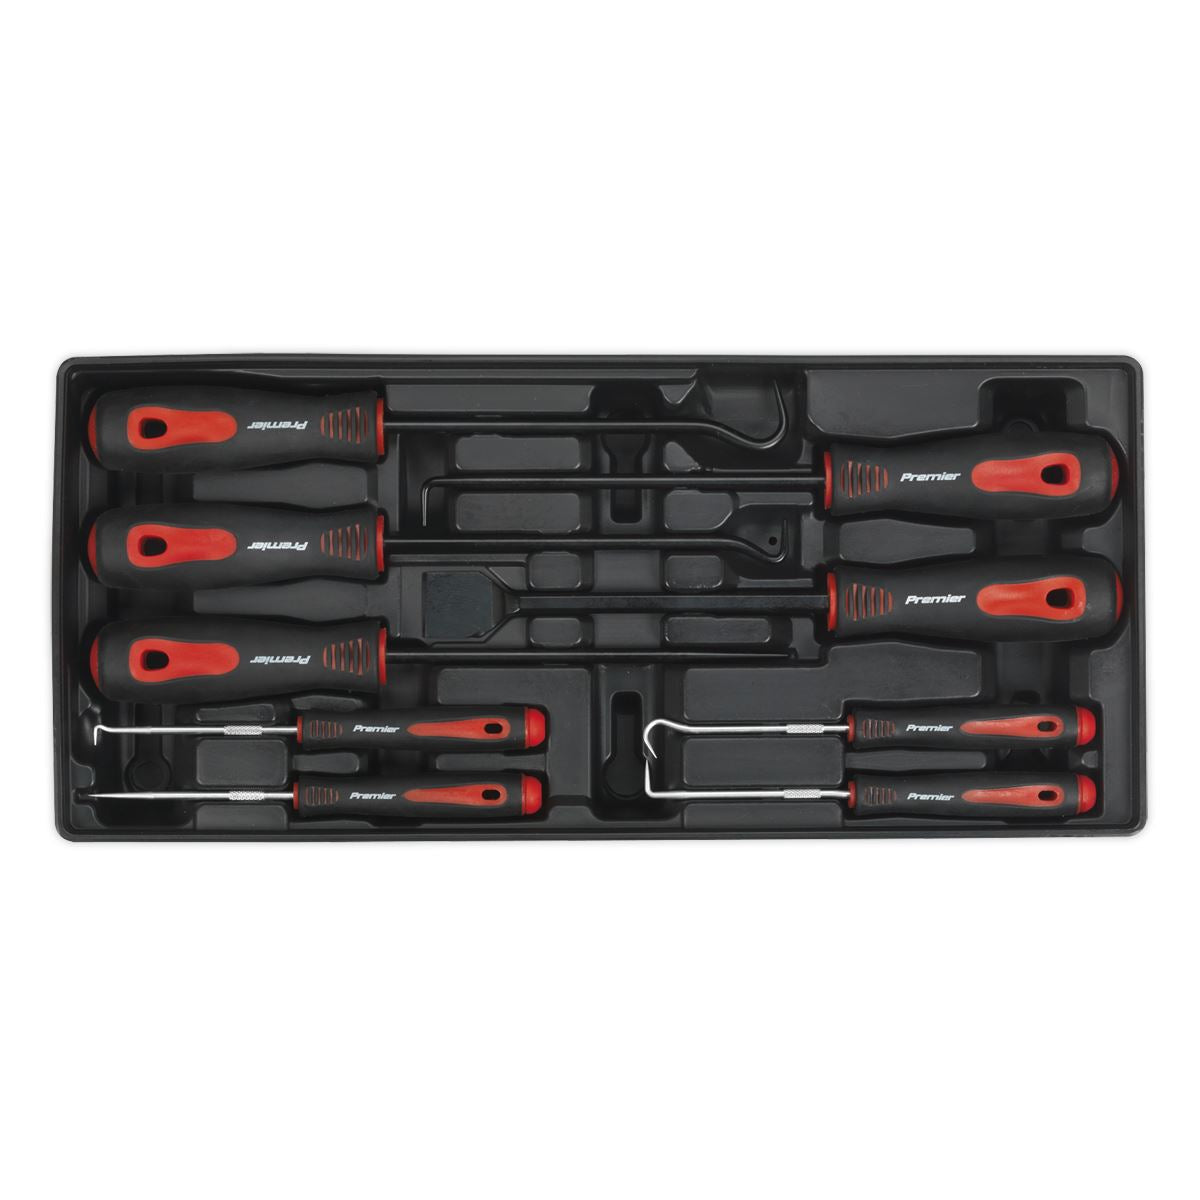 Sealey Premier Tool Tray with Scraper & Hook Set 9pc